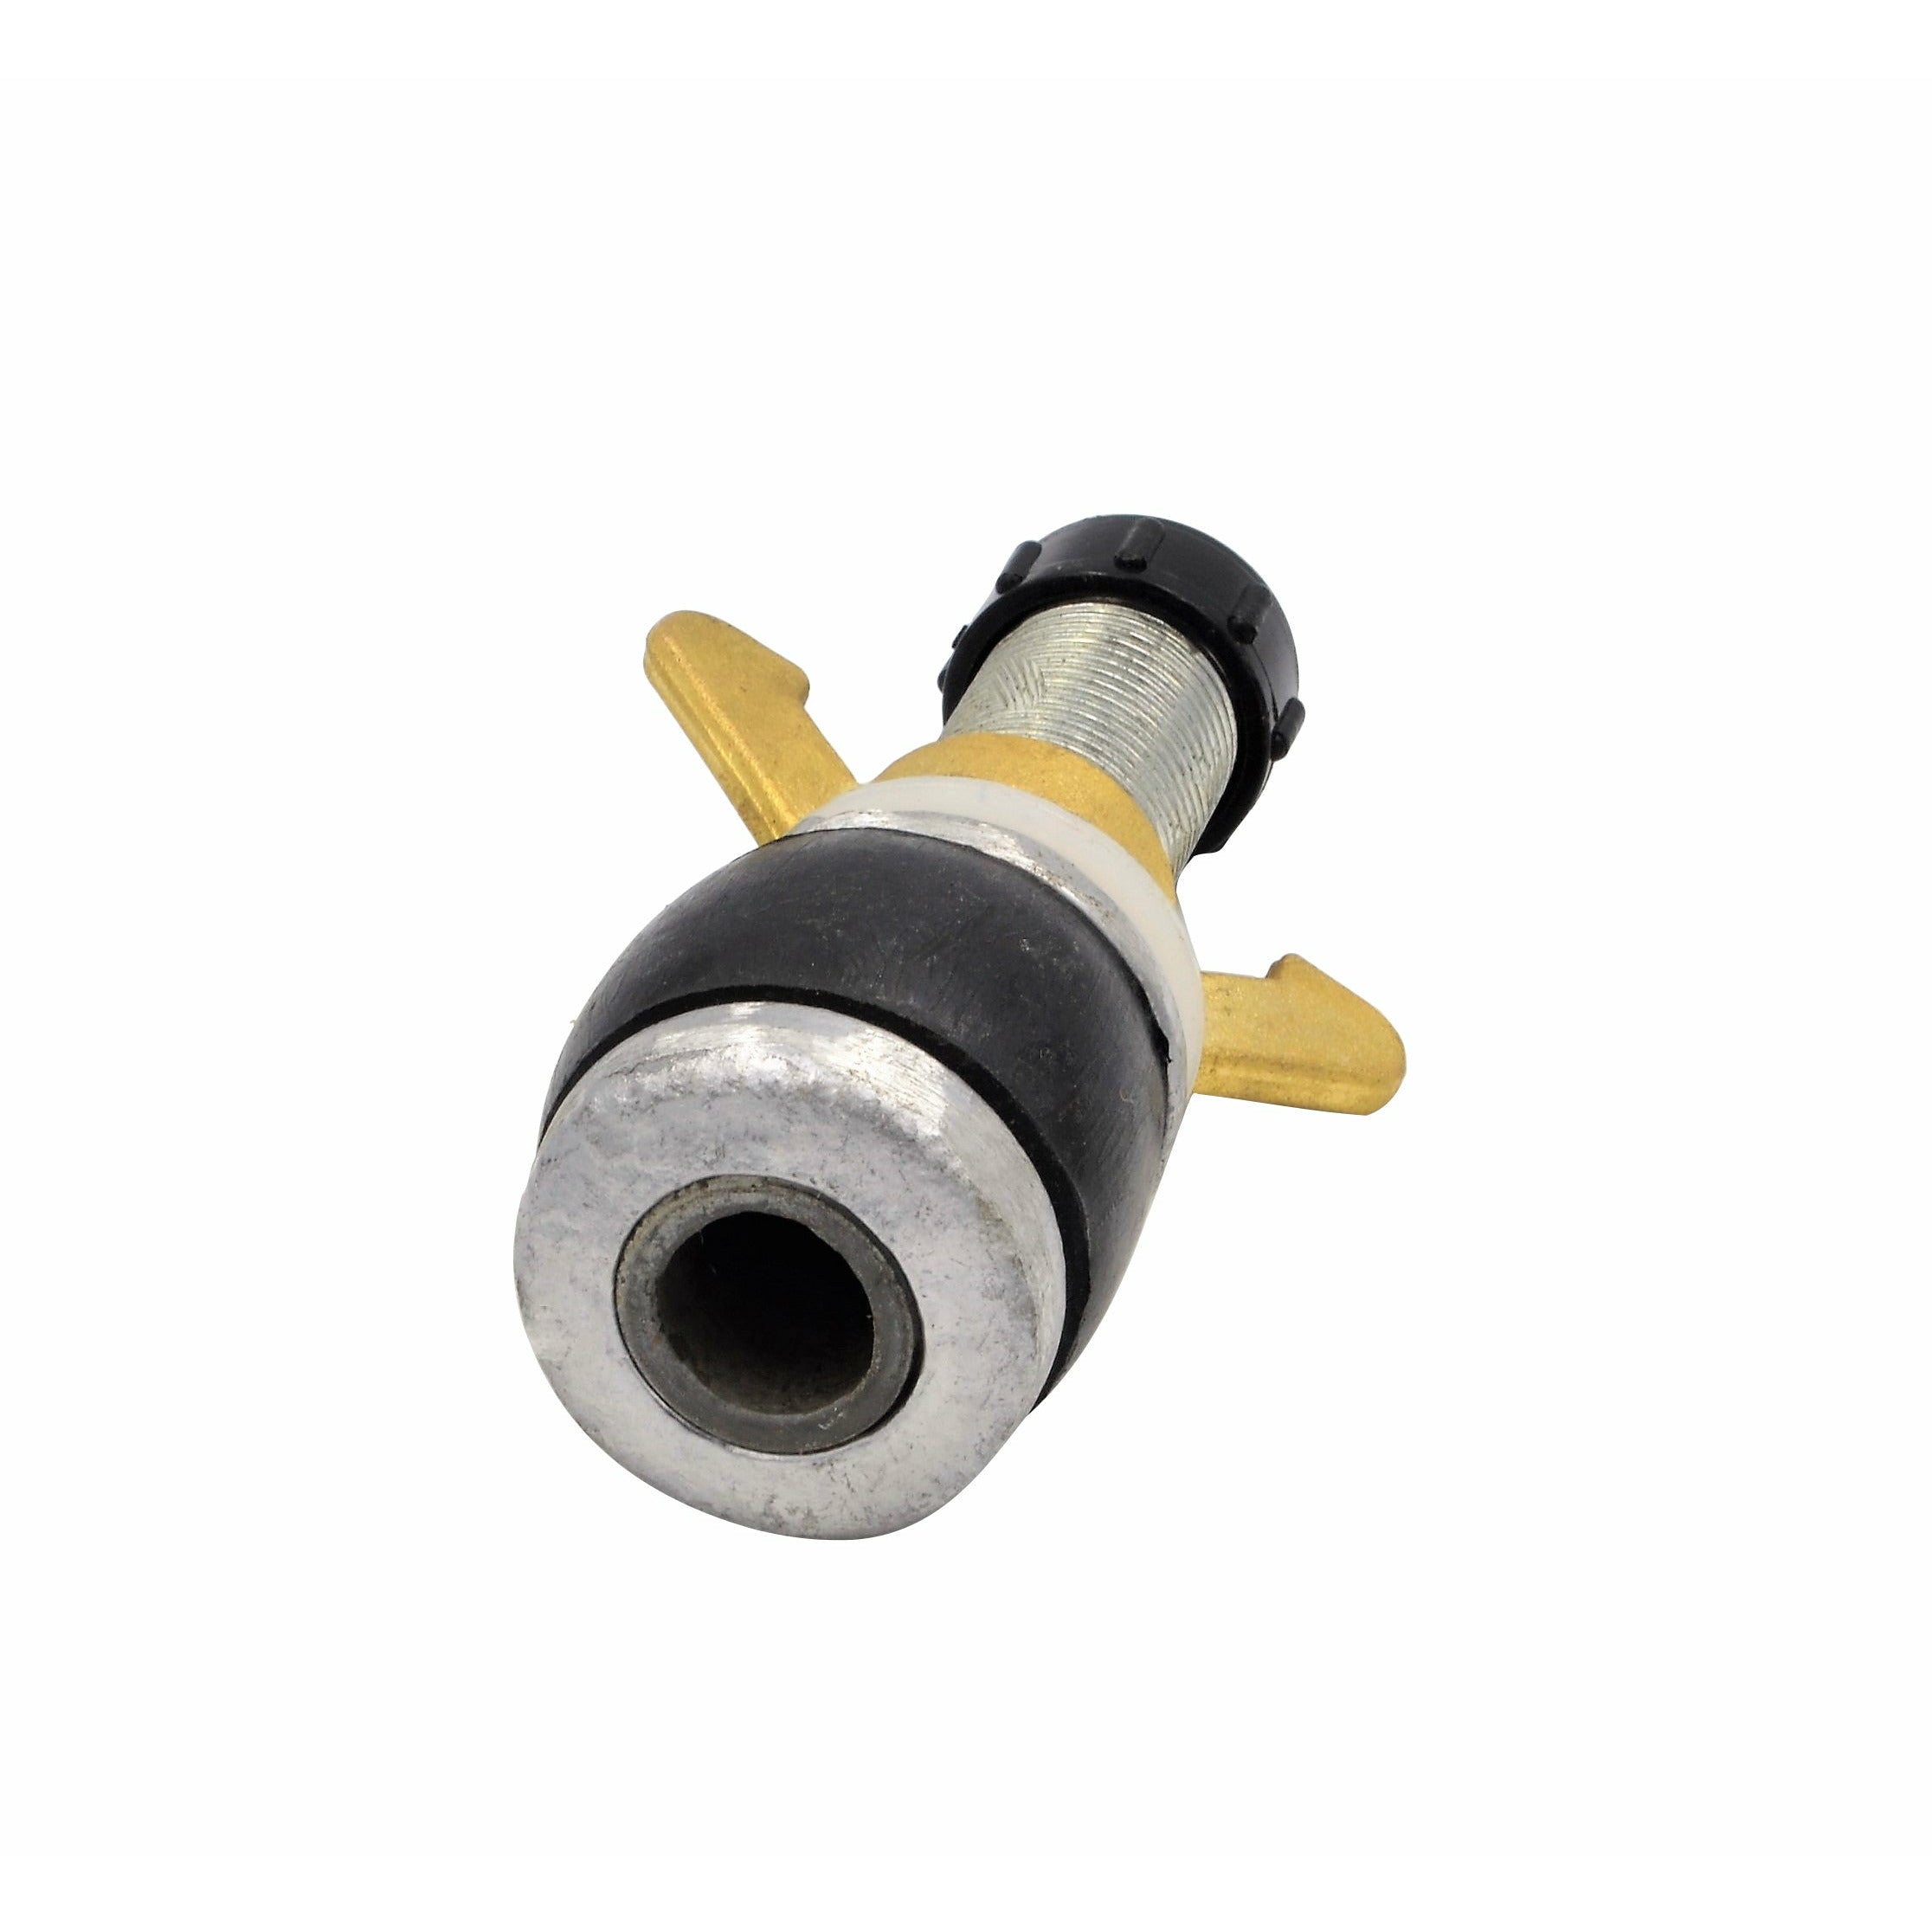 Aluminium Alloy pipe expanding plug with 13 mm bypass 38mm-50mm 203 MPA 038-13